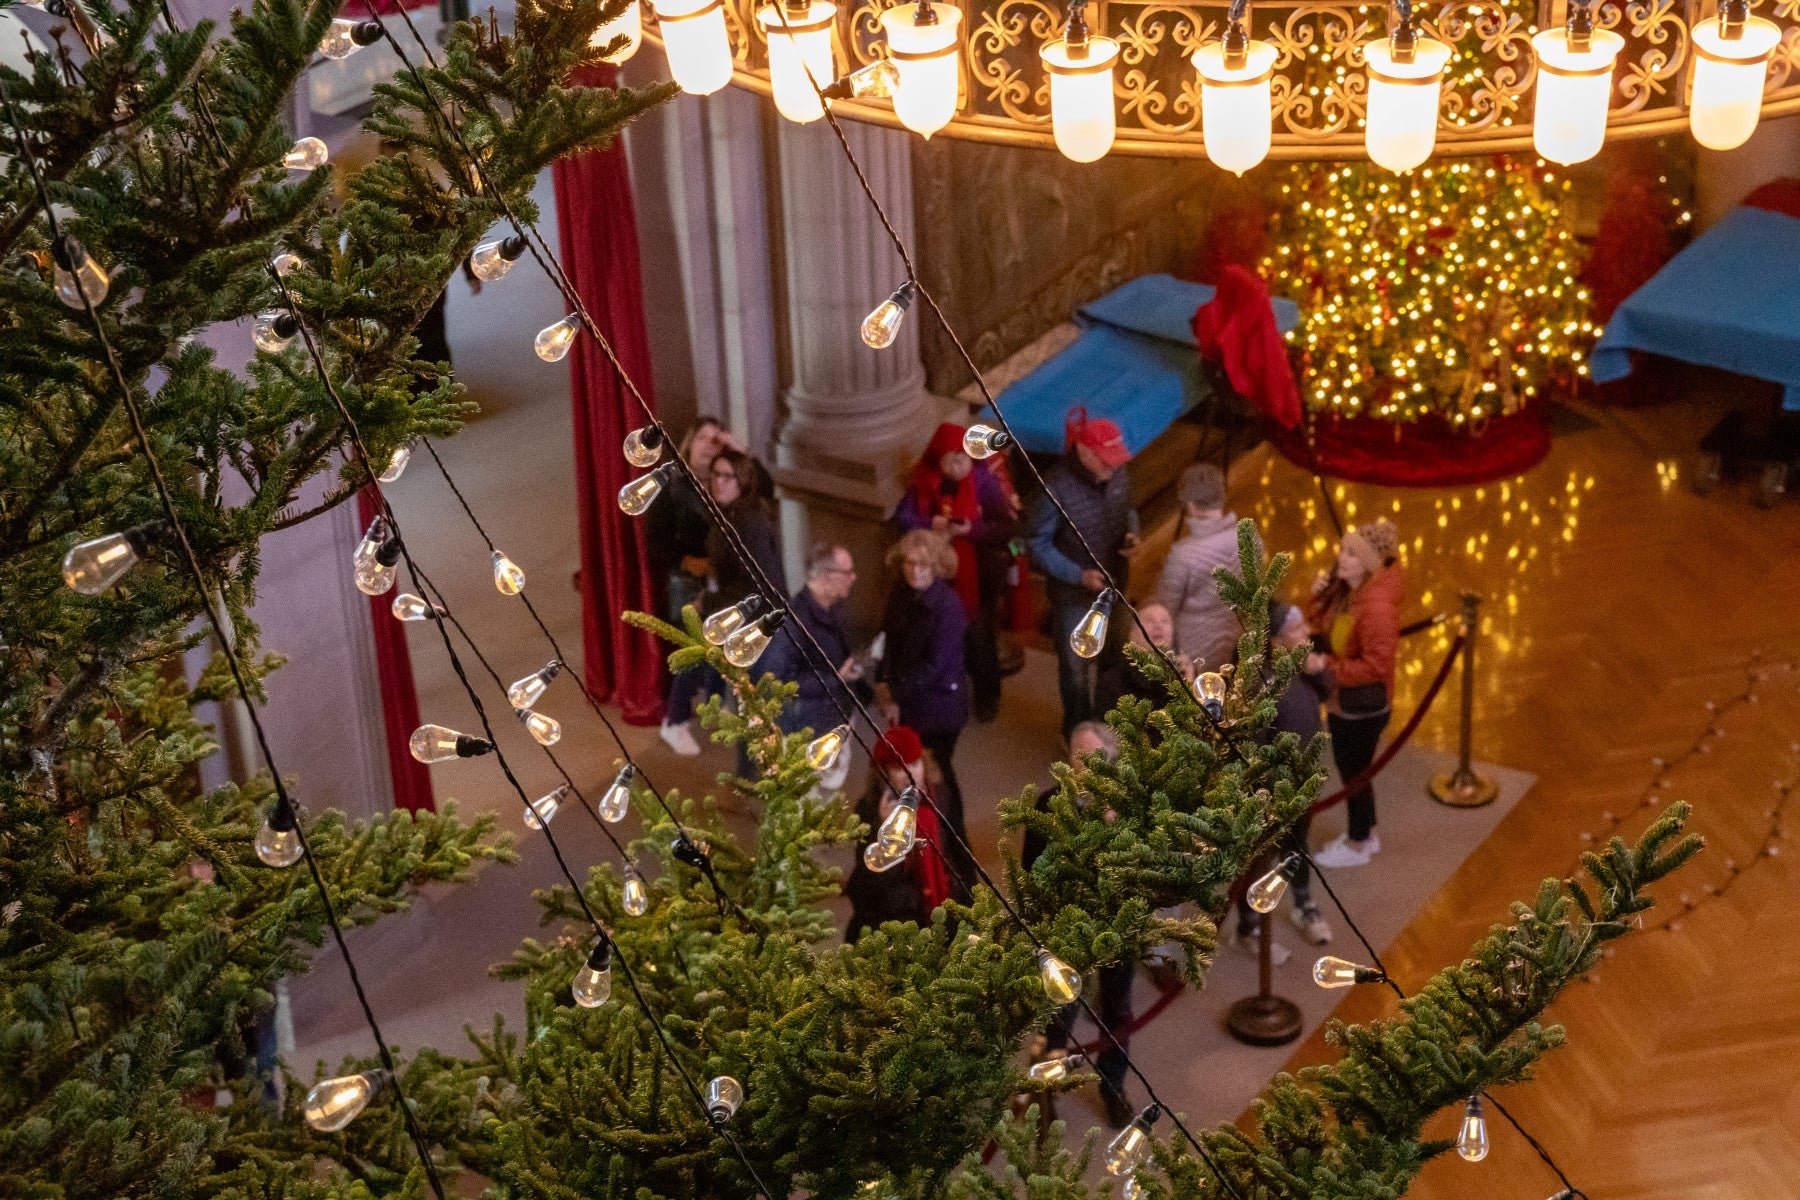 Strings of lights are added to the 35′ Fraser fir tree in the Banquet Hall.